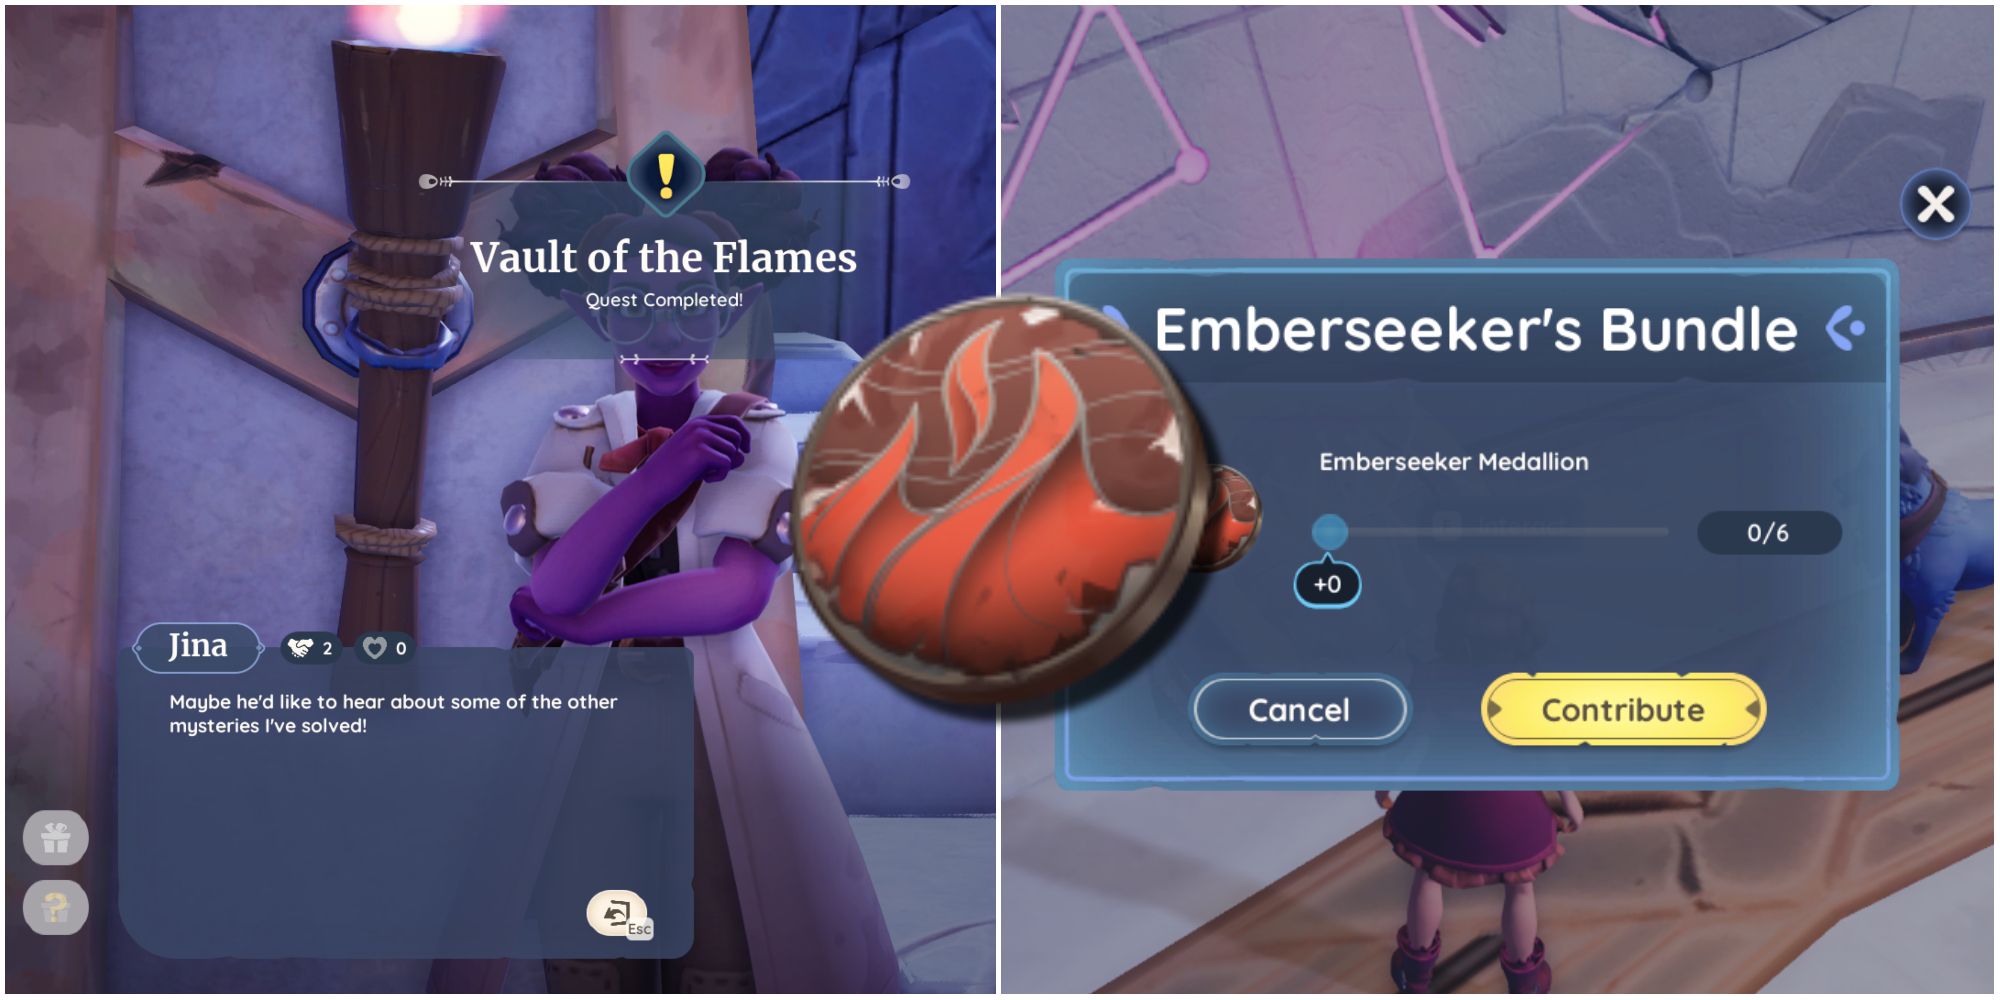 The Vault of the Flames Quest and the Emberseeker's Bundle with the Emberseeker Medallions 